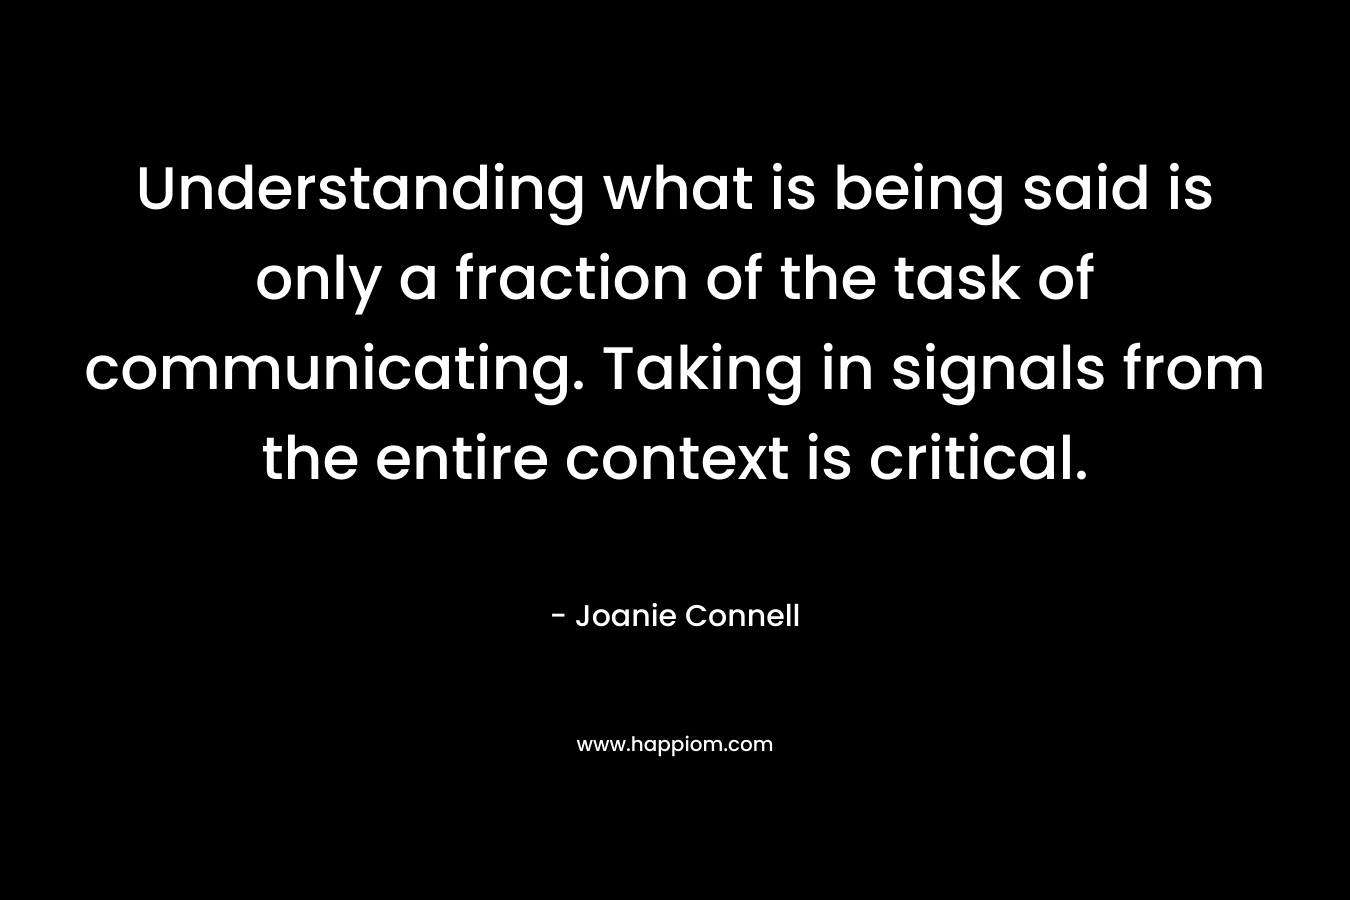 Understanding what is being said is only a fraction of the task of communicating. Taking in signals from the entire context is critical. – Joanie Connell